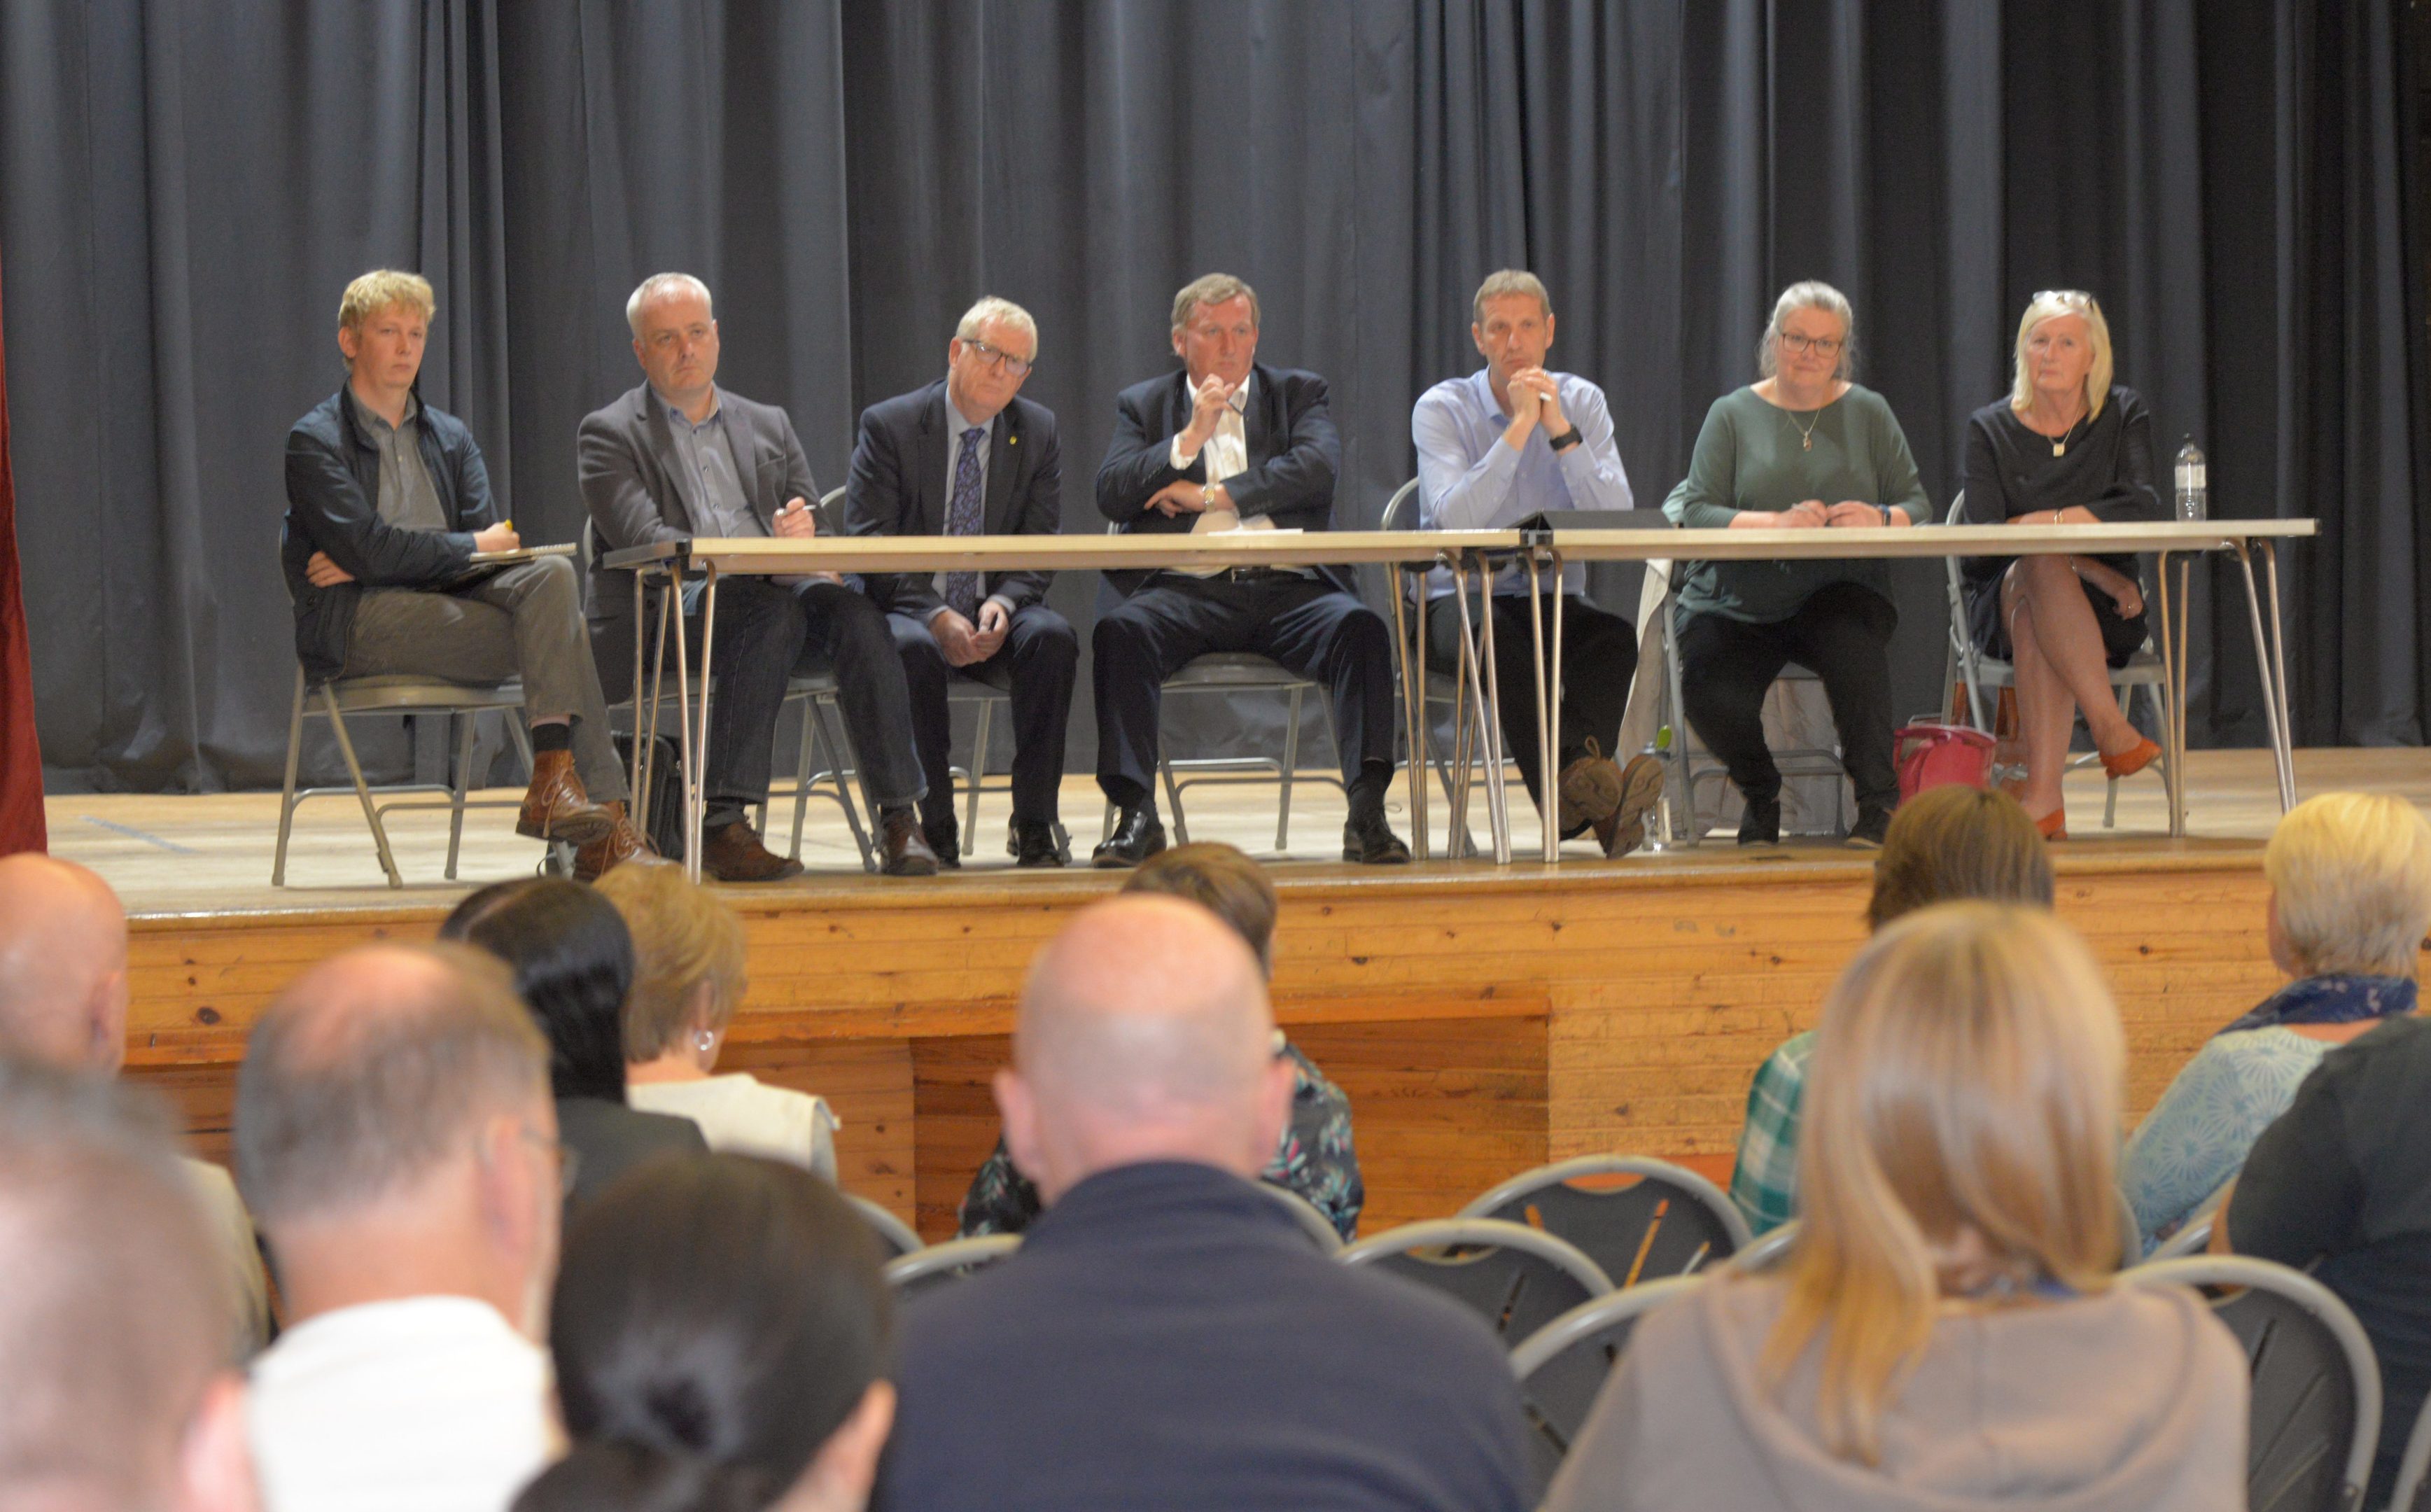 The panel facing the public at the meeting in Inverkeithing High School.